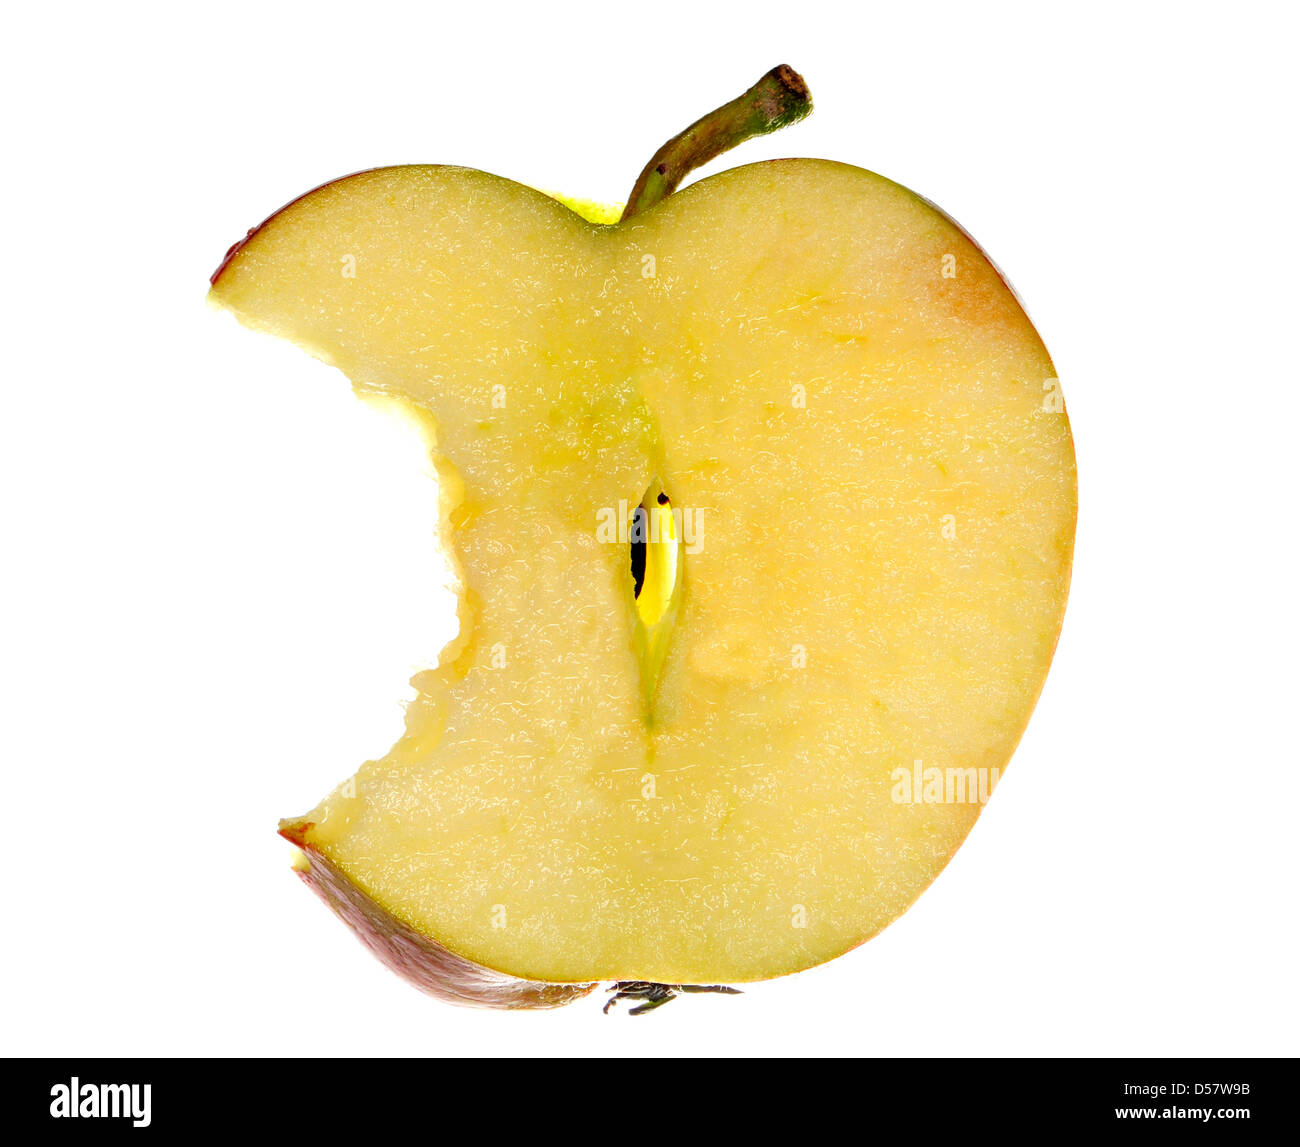 Thin slice of apple with a bite taken out Stock Photo